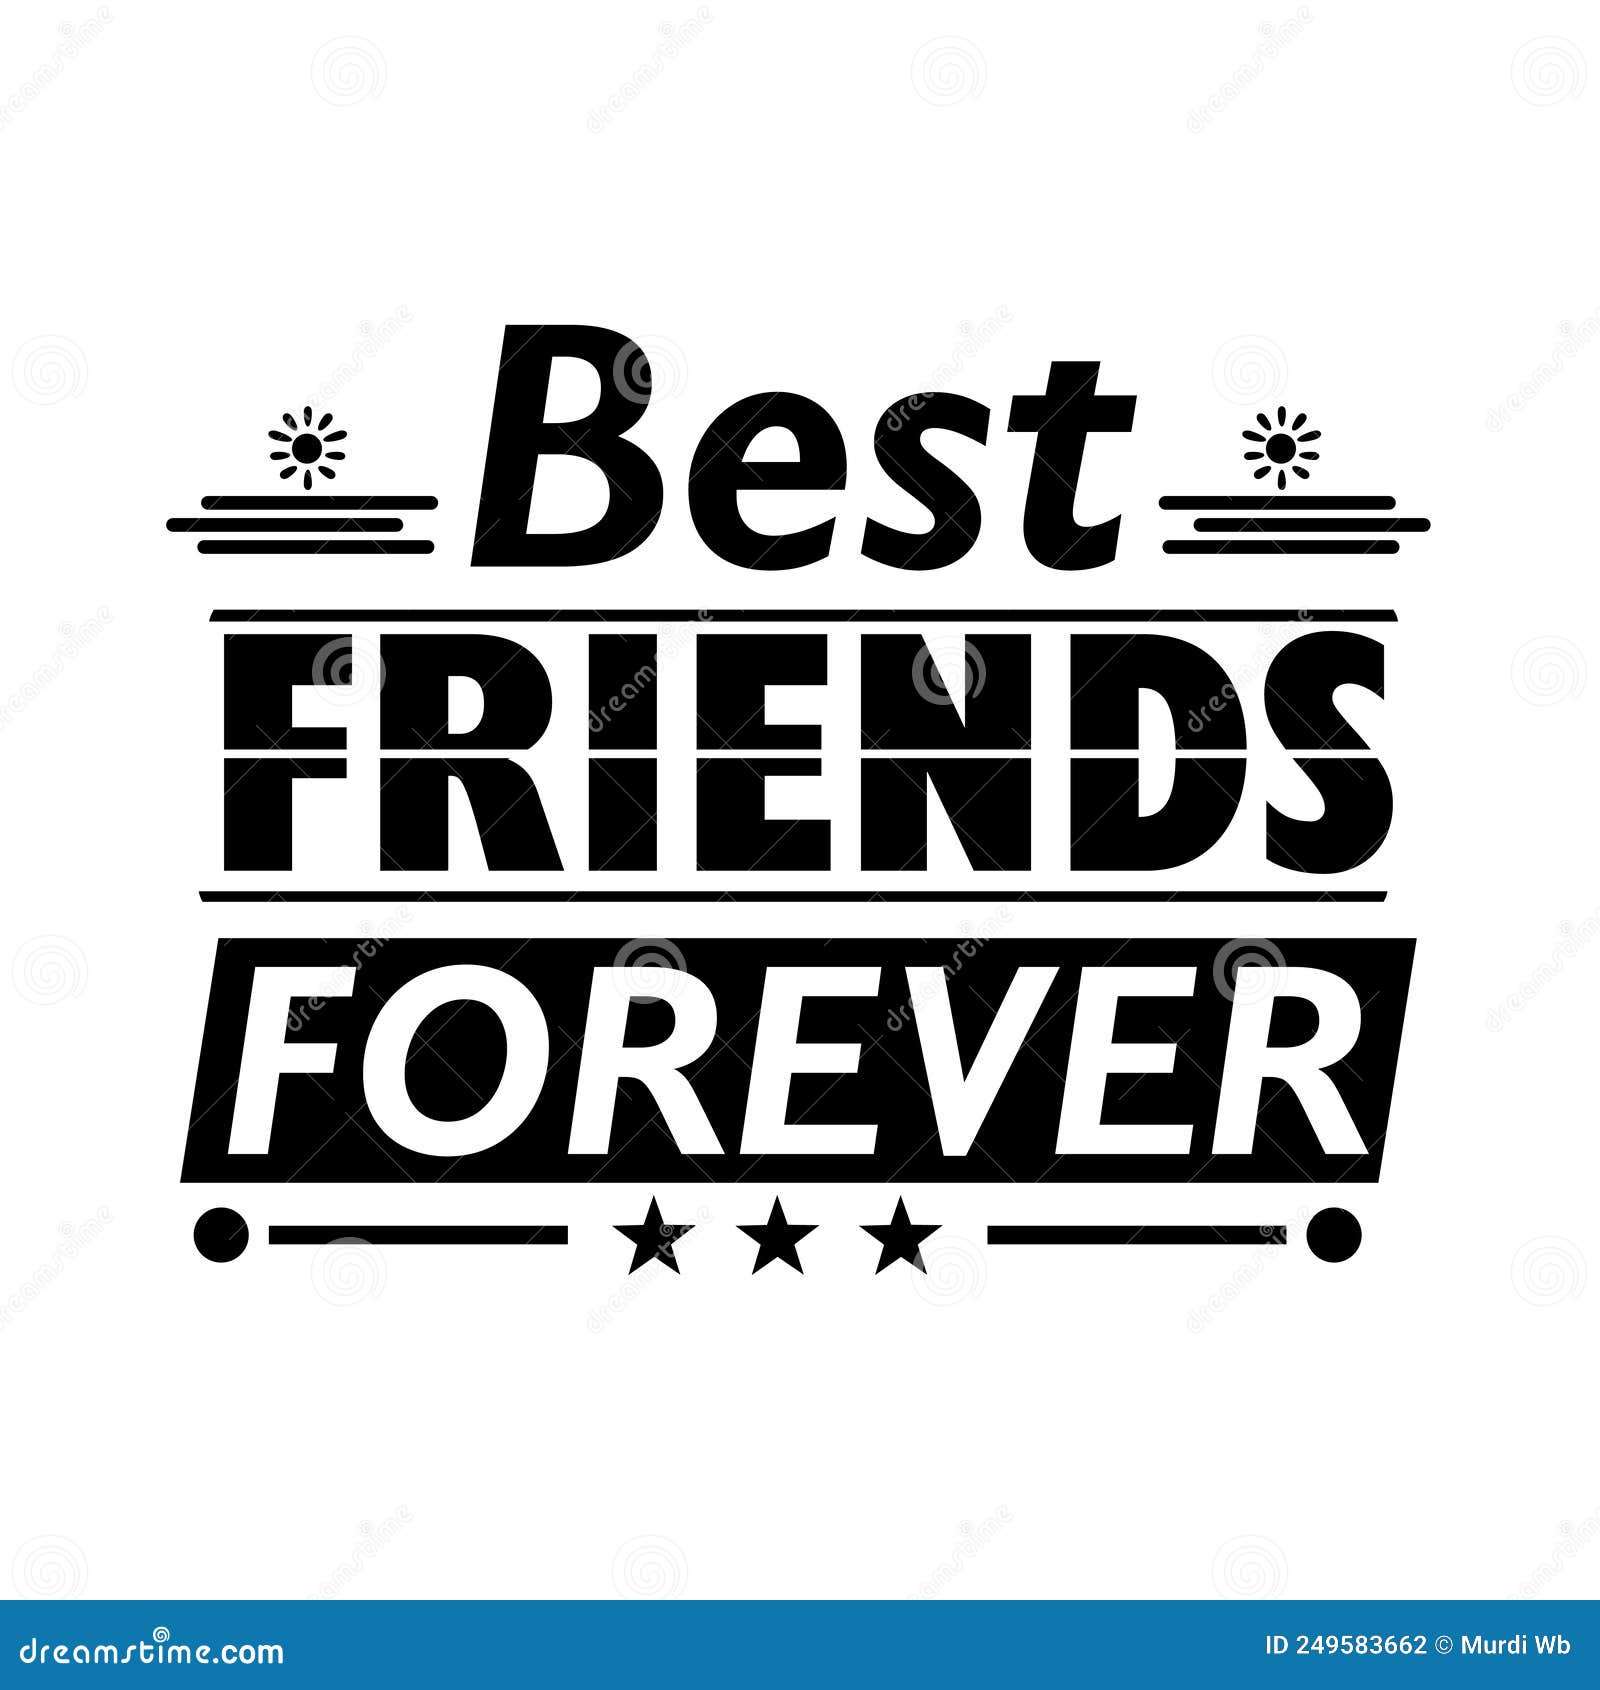 Best Friends Forever Quotes Stock Vector - Illustration of banner ...